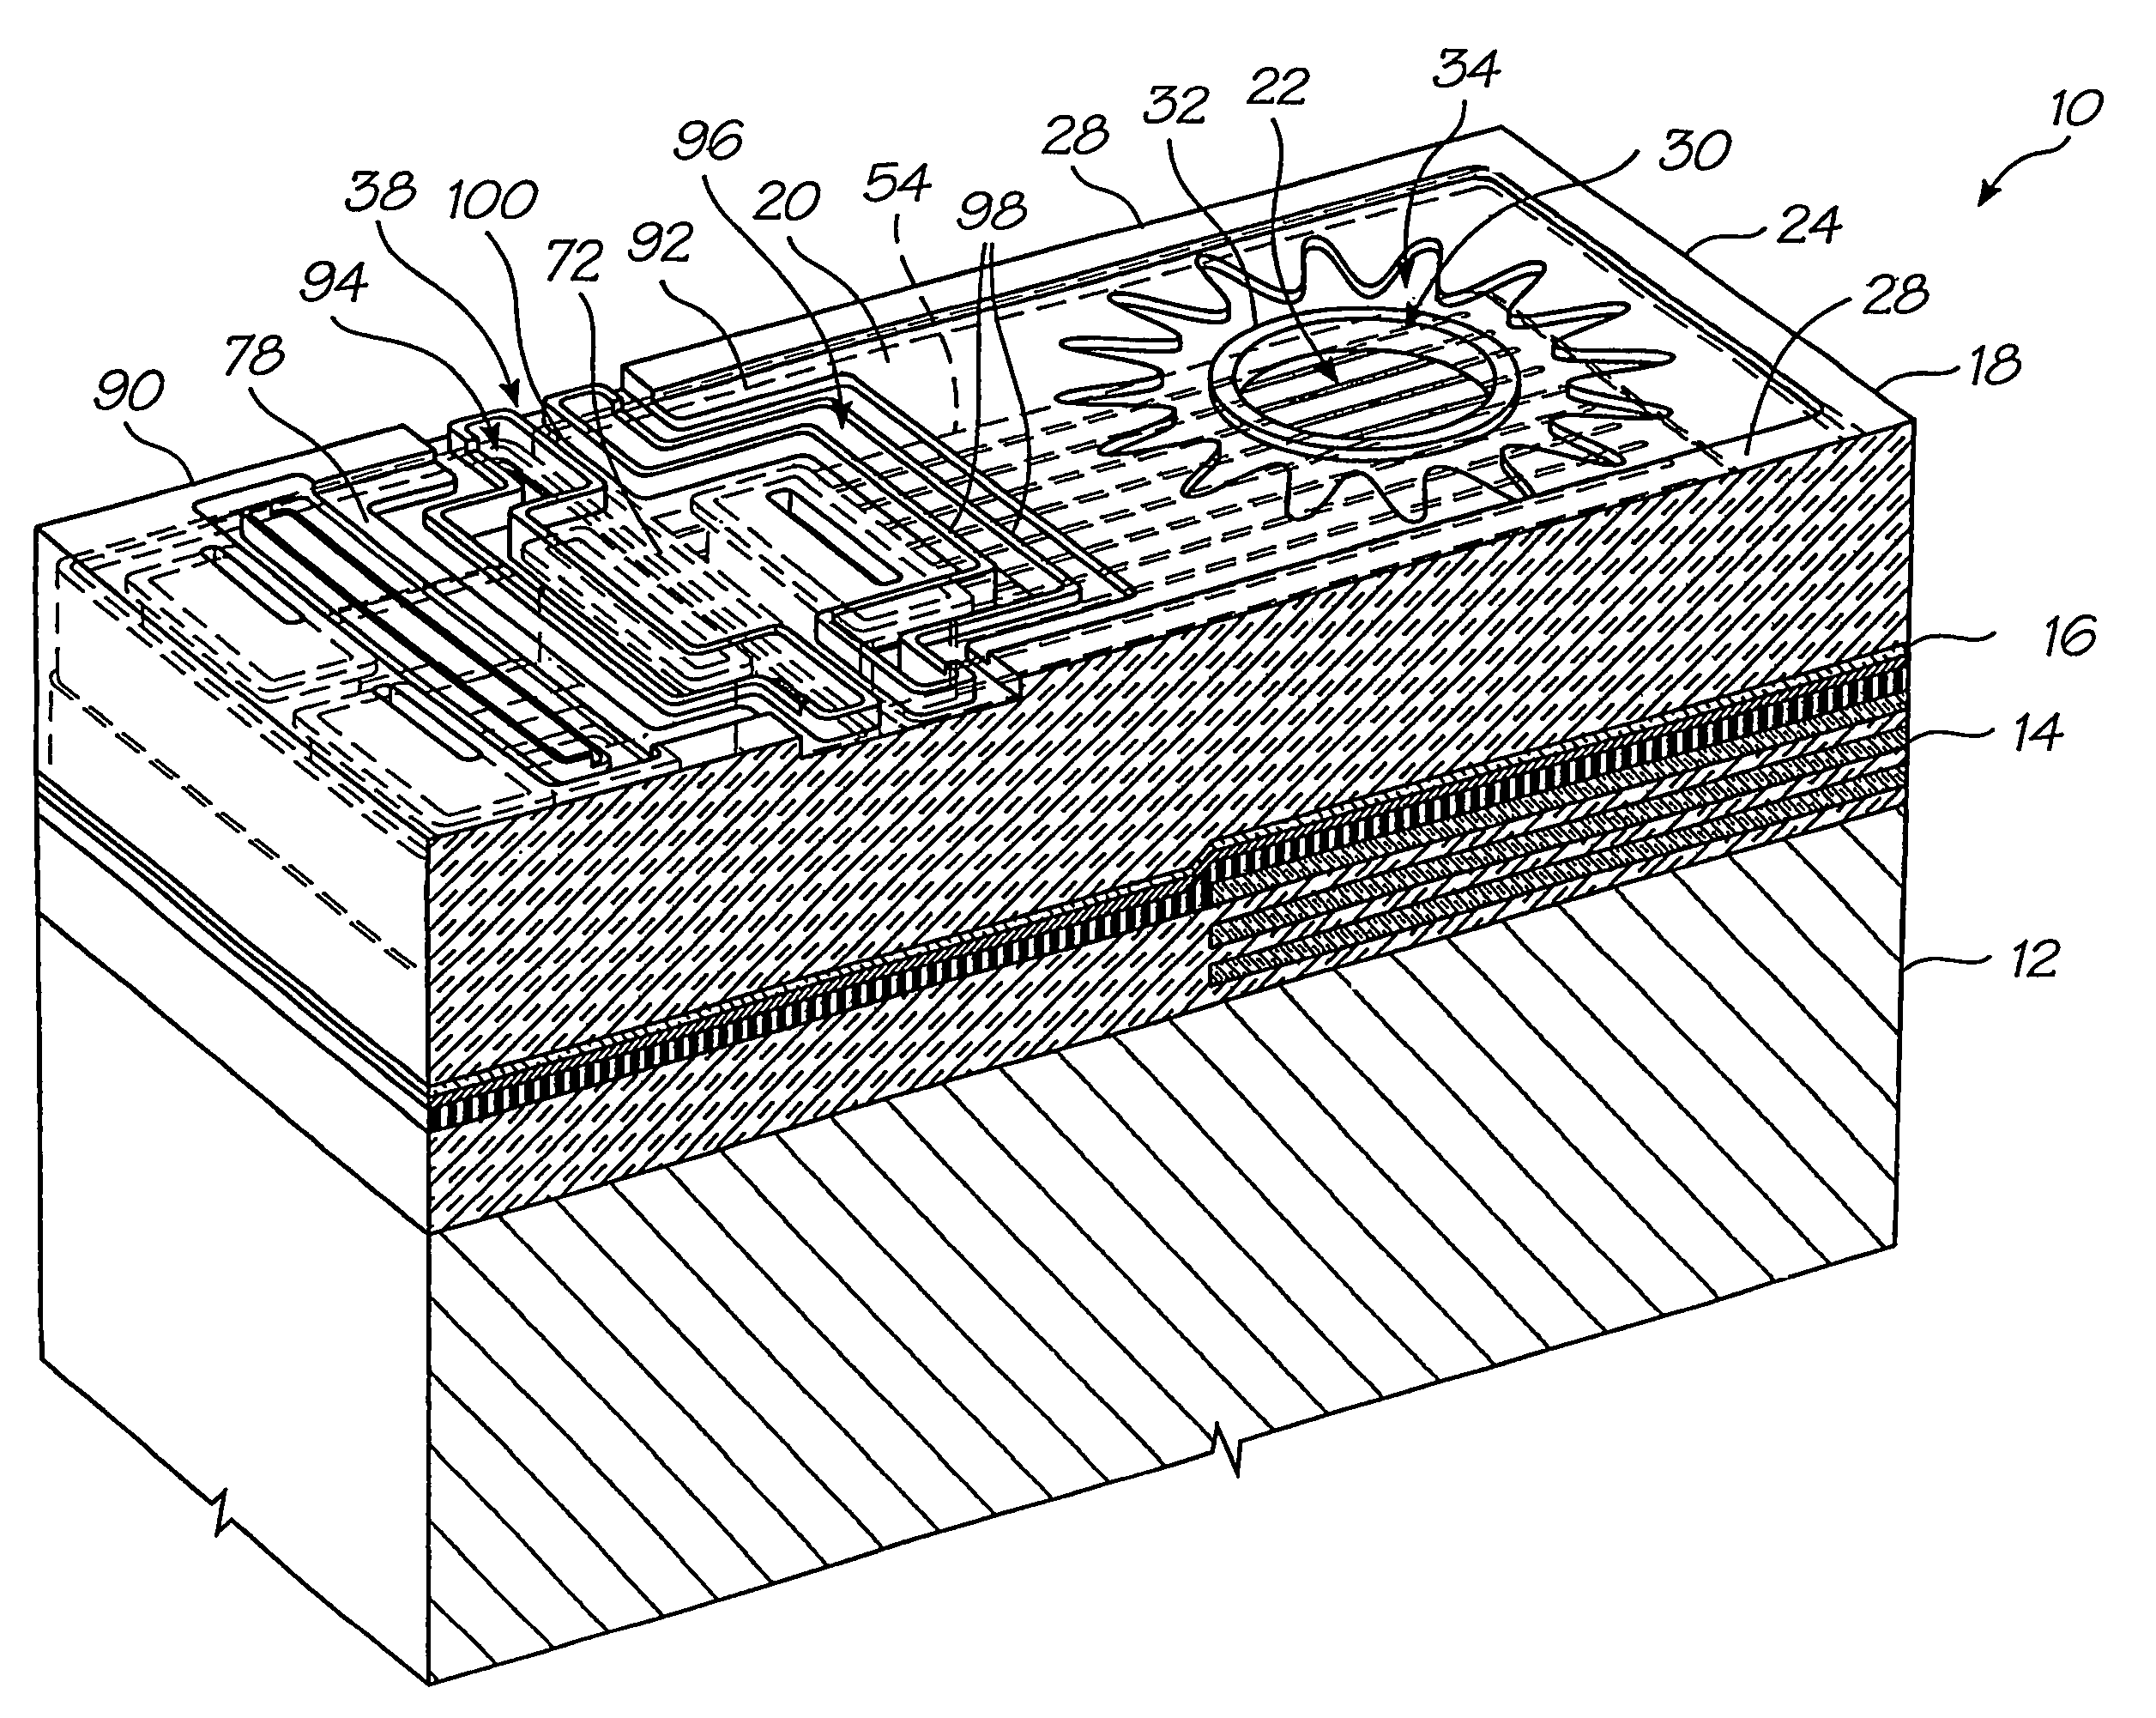 Discrete air and nozzle chambers in a printhead chip for an inkjet printhead